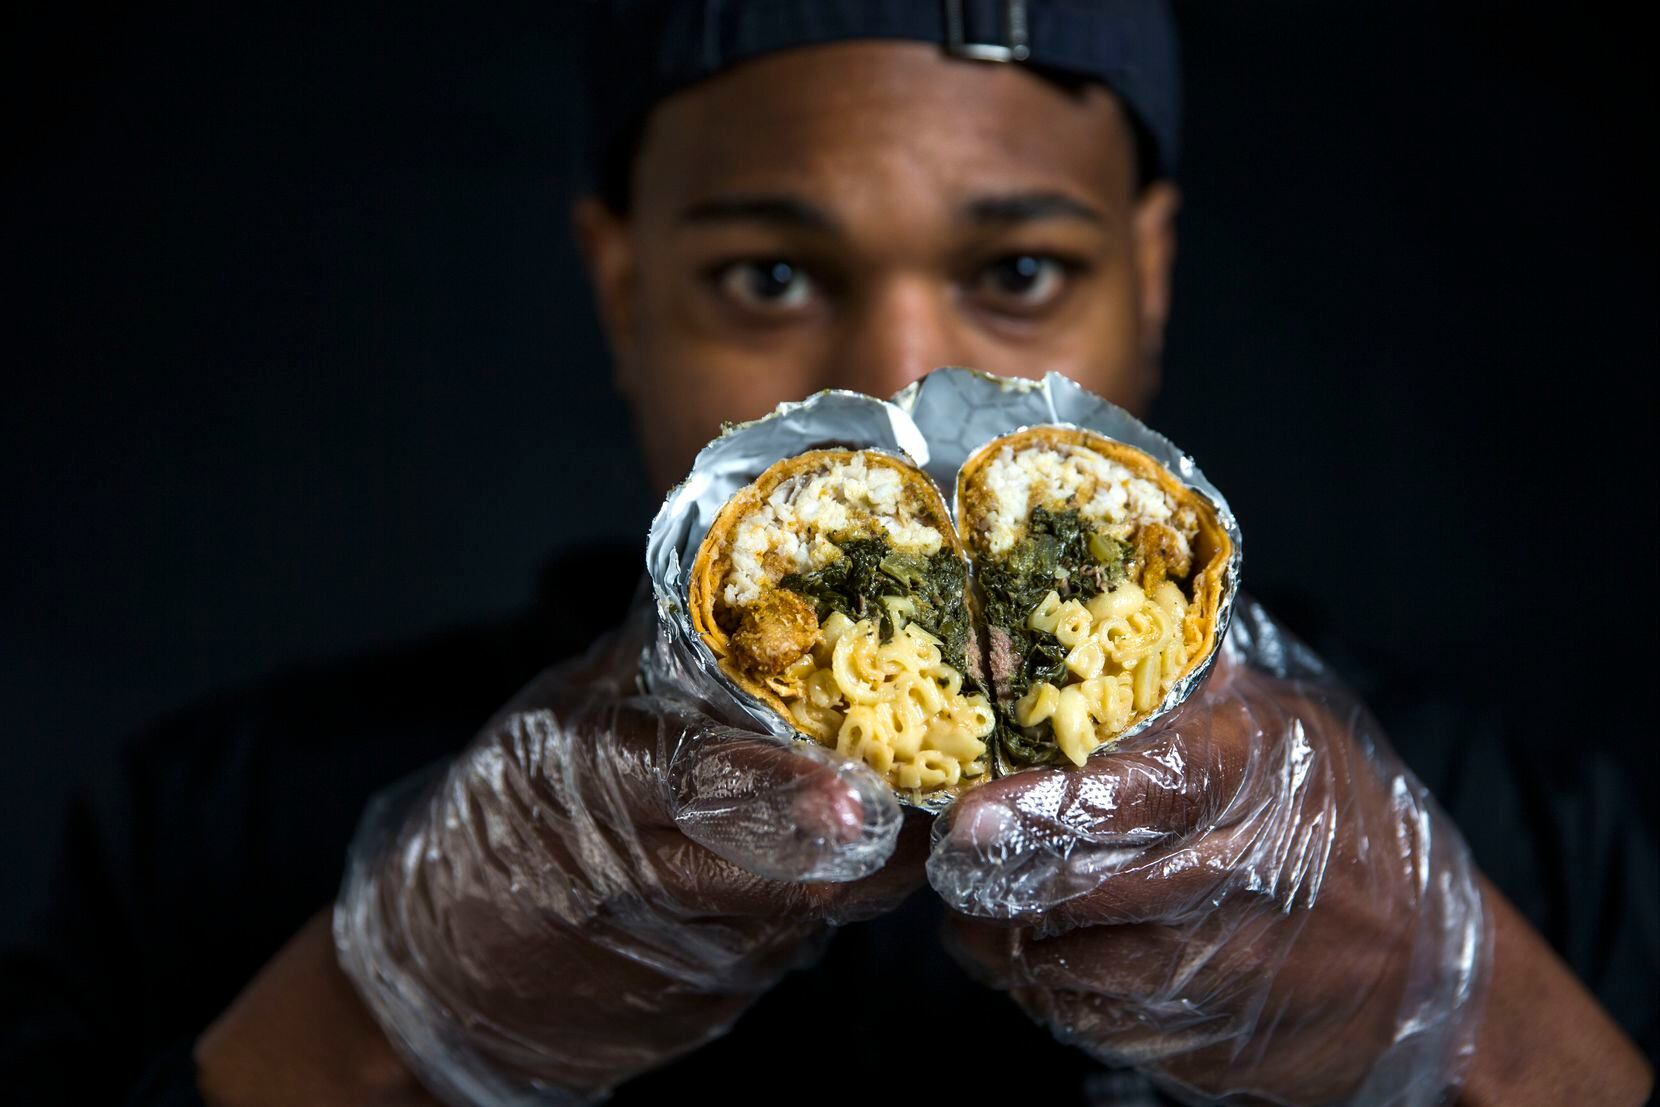 Jessie Washington, Brunchaholics owner and chef, is the creator of a truly monstrous soul food burrito. Food Network took notice.